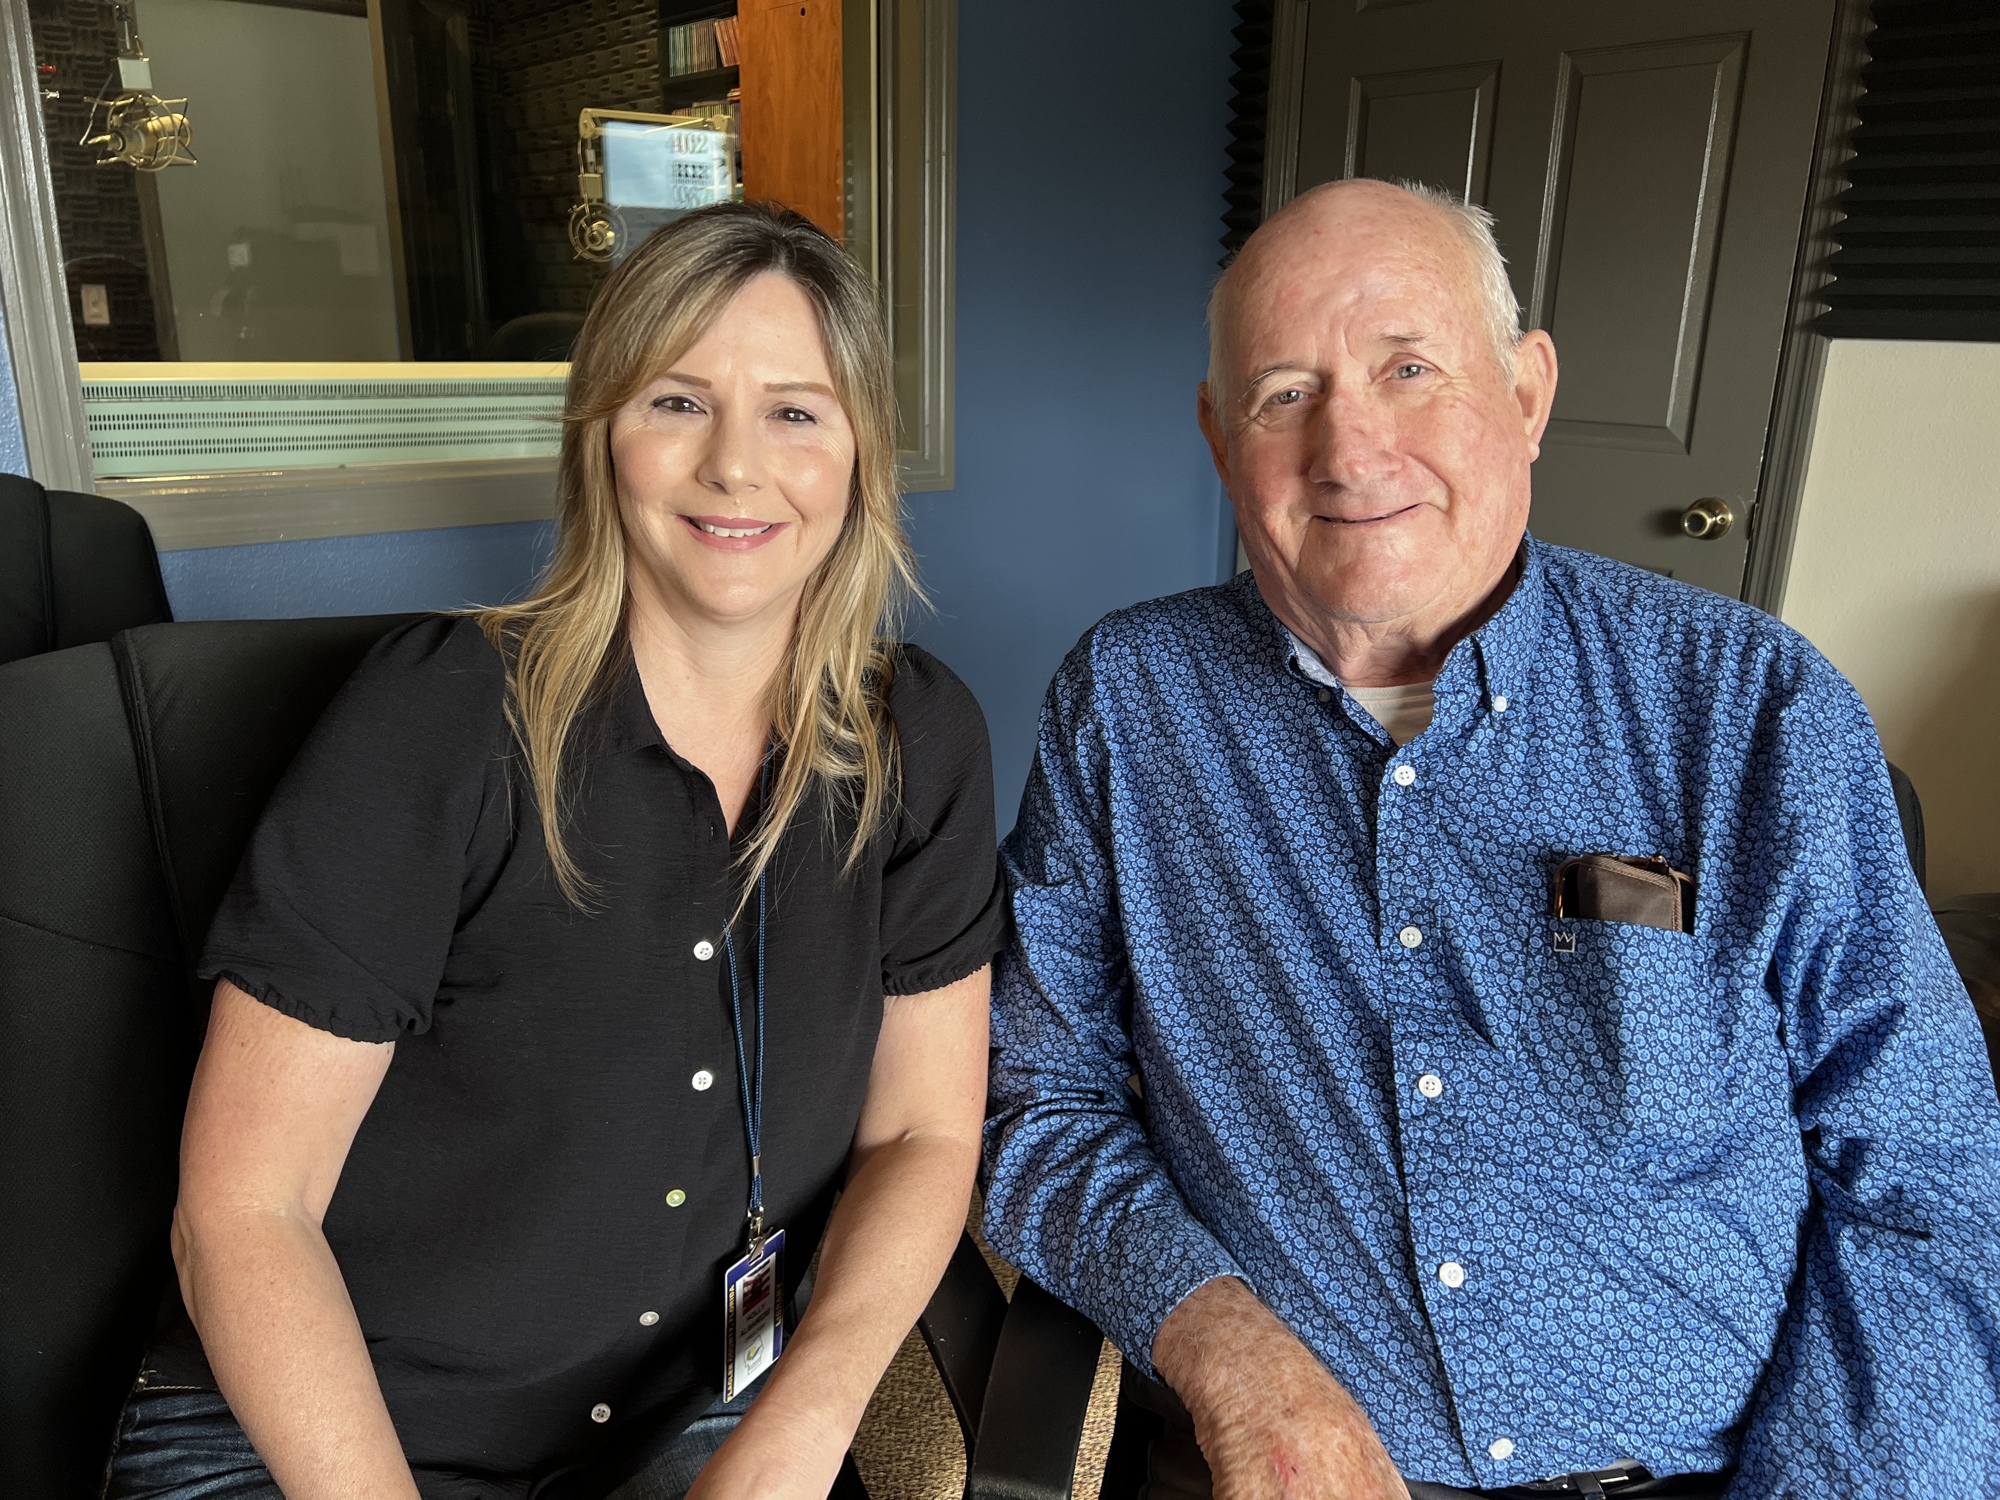 Holly Albanese and David Sullivan at the Flagler Broadcasting studio on April 1. Photo by Brian McMillan